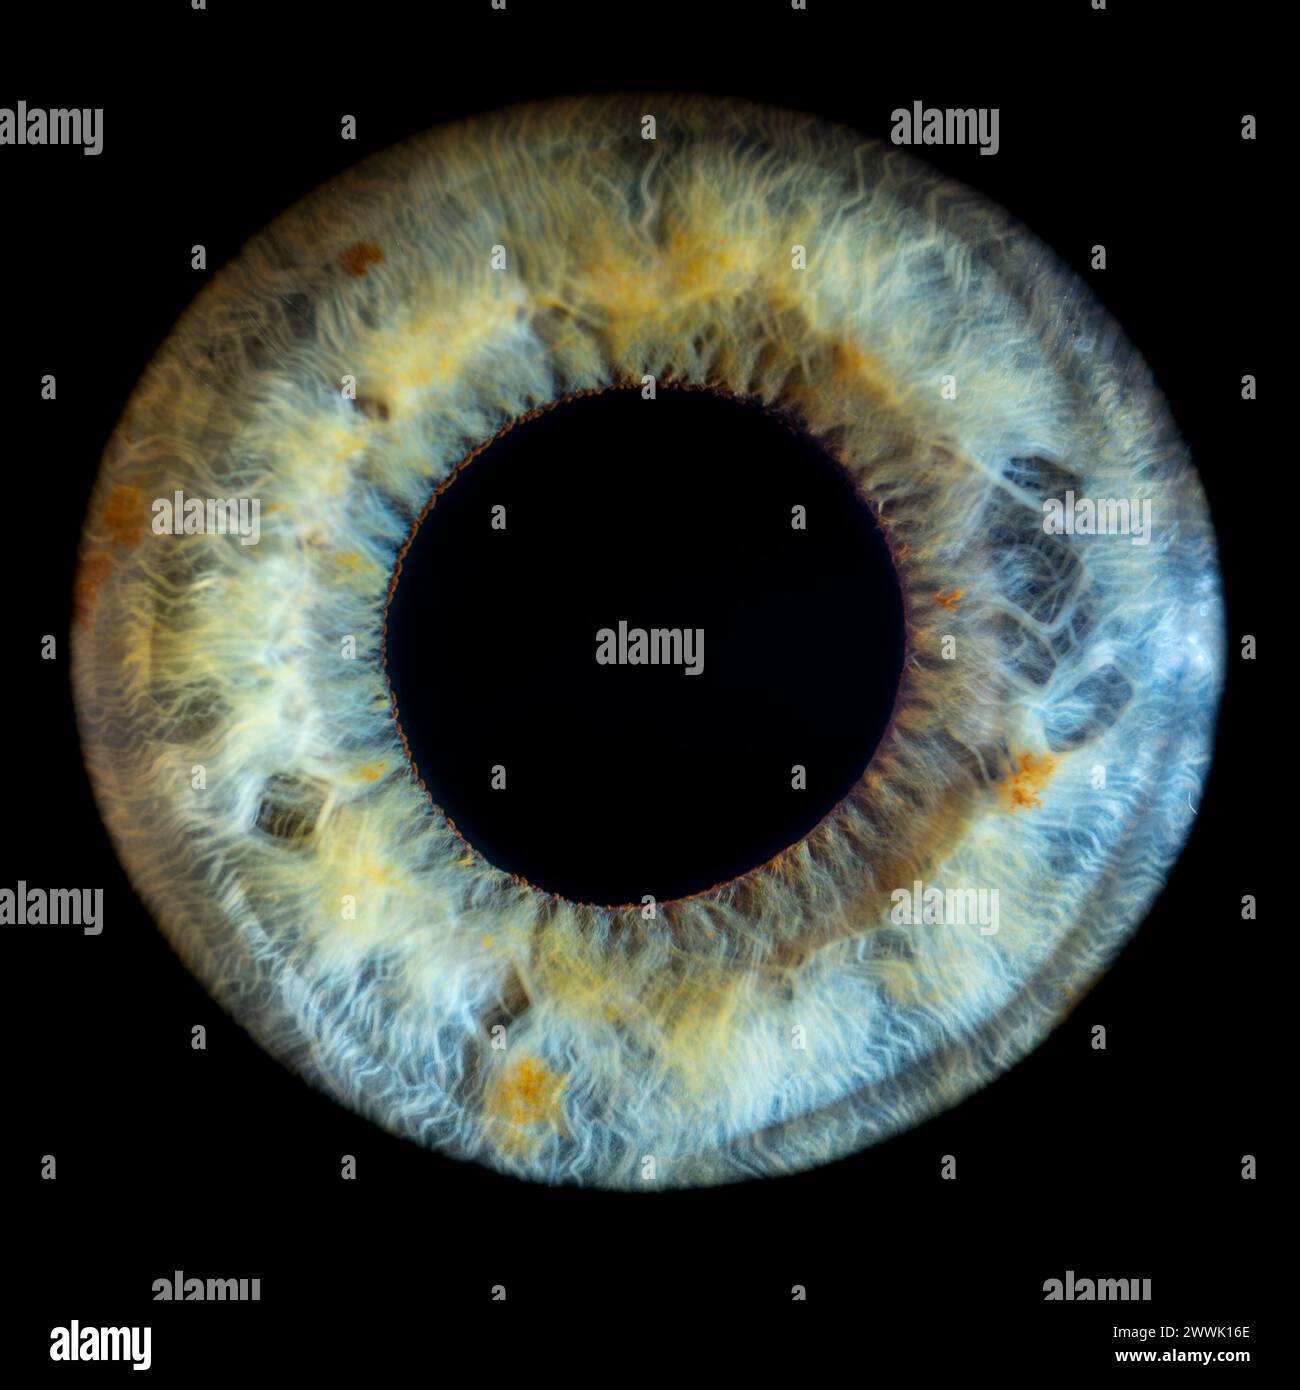 Description: Macro photo of human eye on black background. Close-up of female blue-green colored eye with yellow spots. Structural Anatomy. Iris Wide Stock Photo